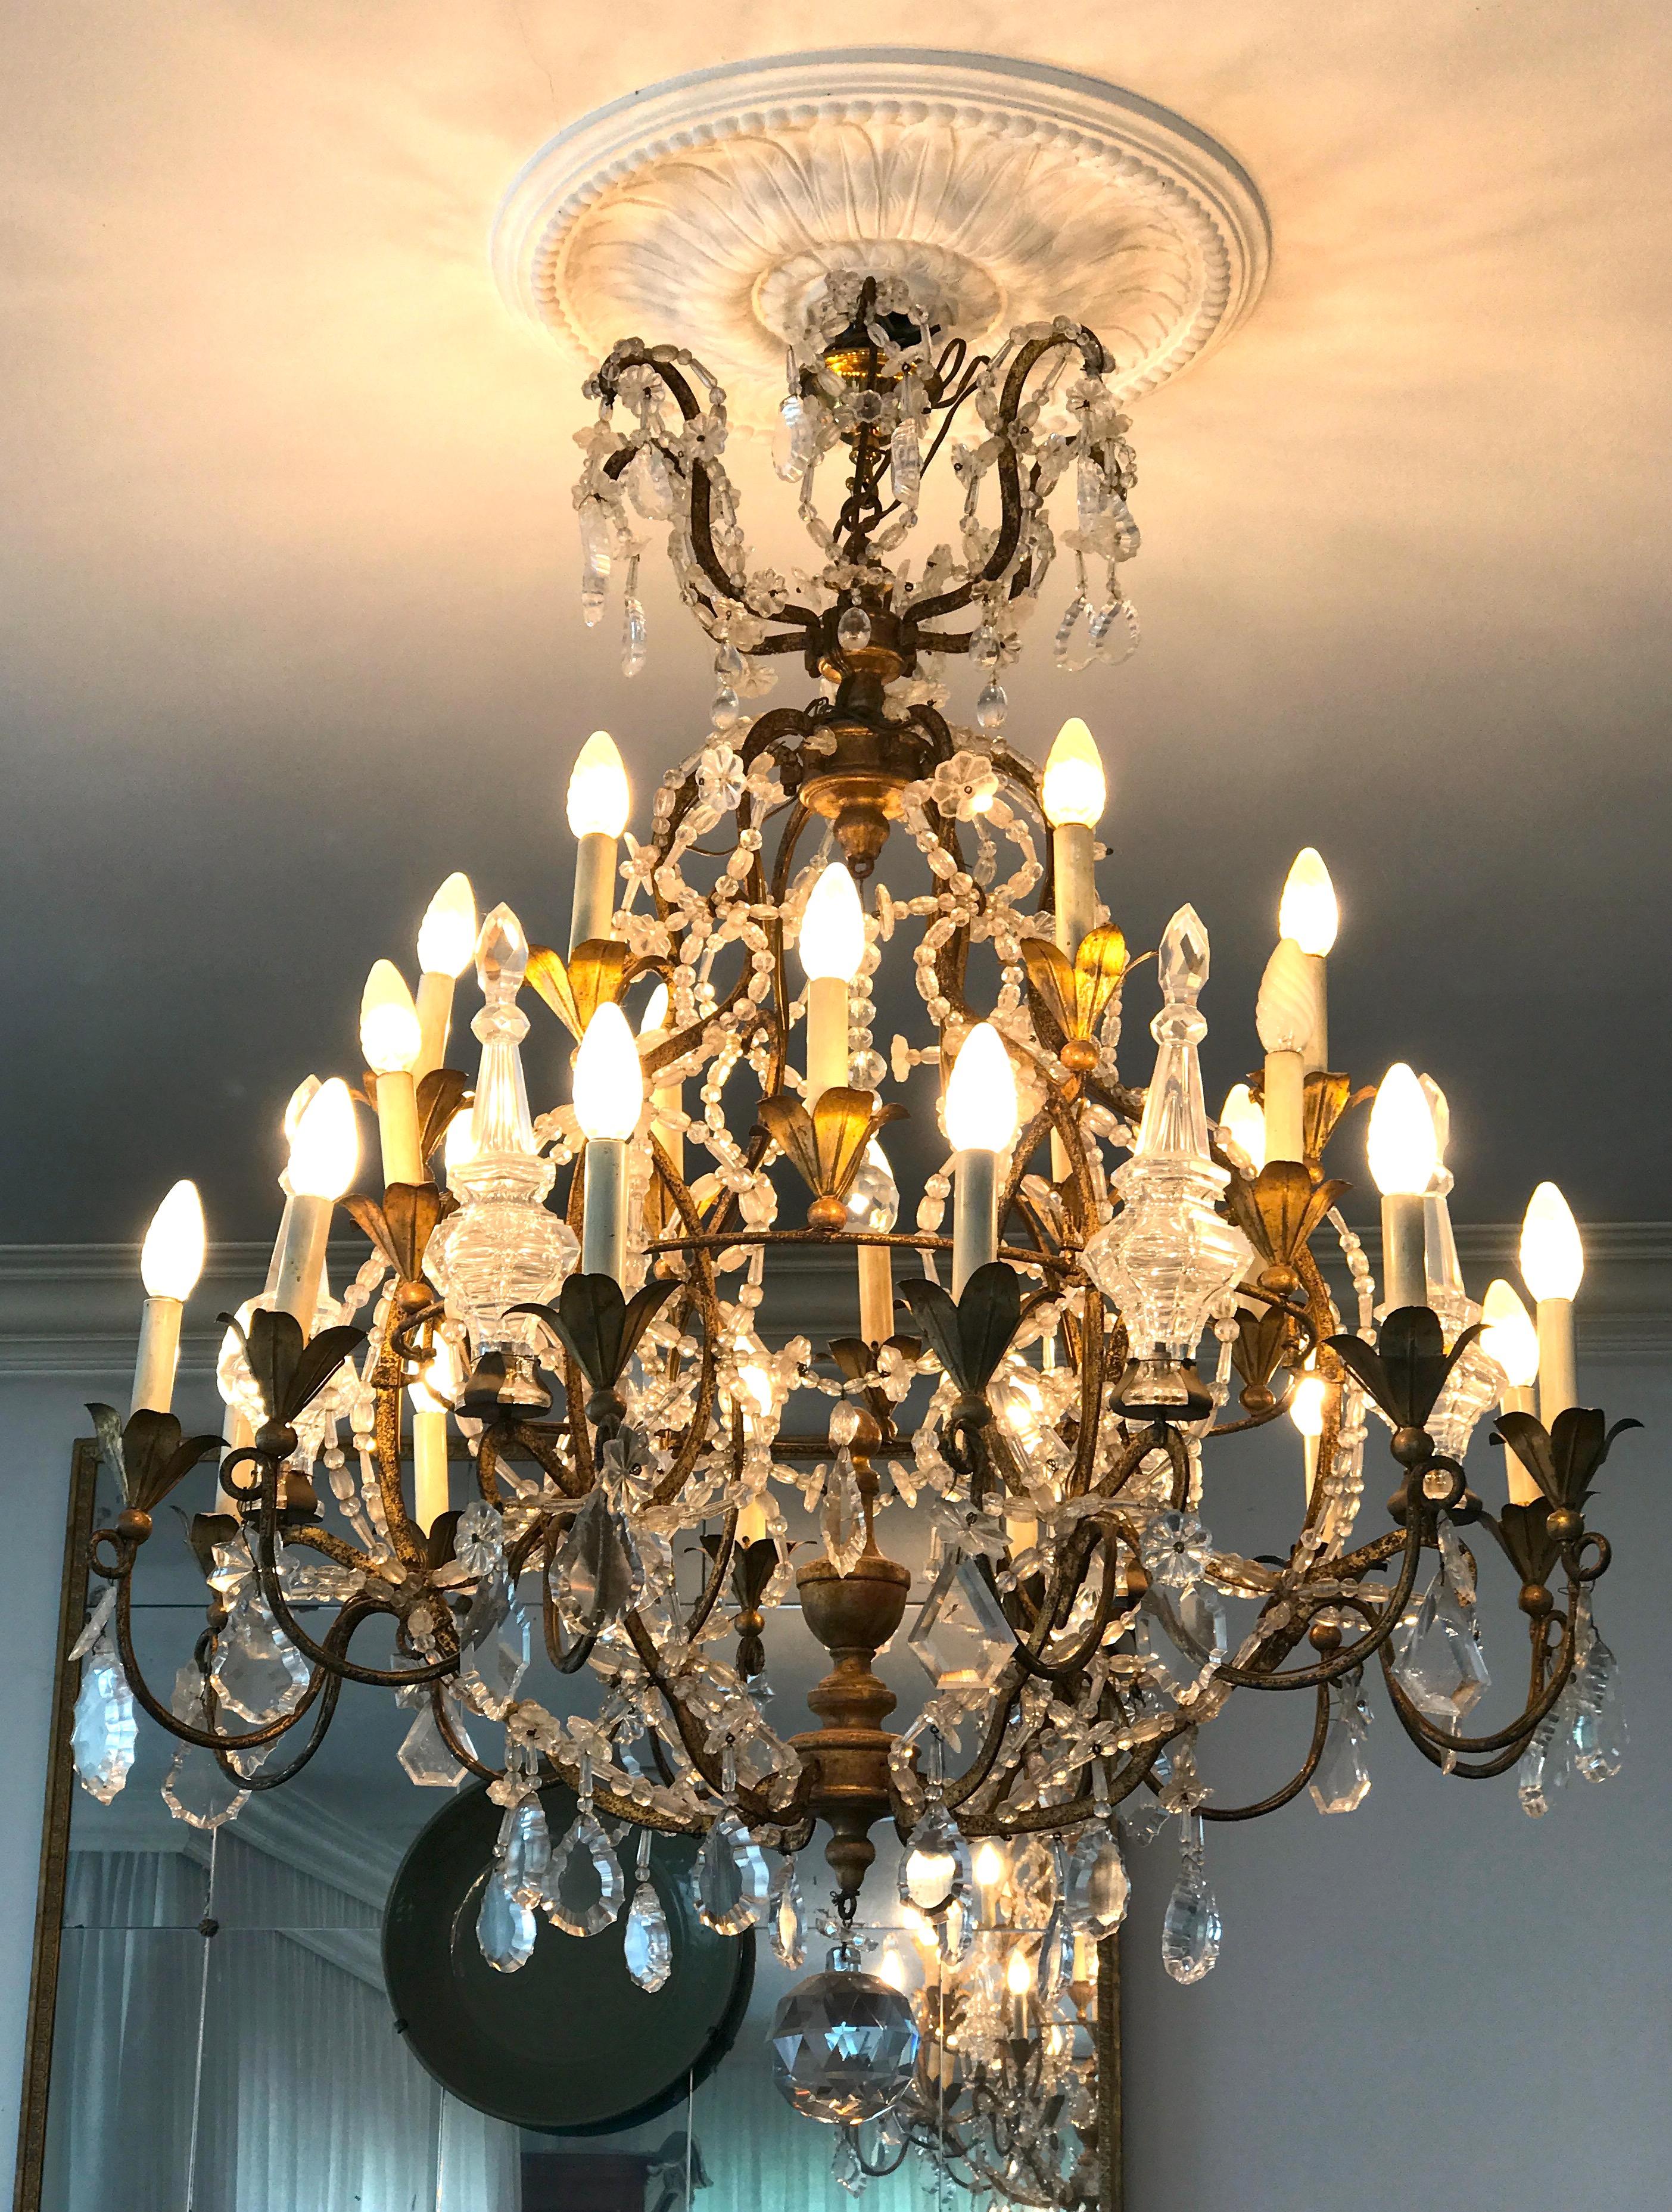 Charming 18th century Nord - Italian chandelier with elaborately scrolled gilt metal arms draped with cascades of cut crystal beads. Accented overall with superb crystal drops. Beautiful foliate motif candle cups , centered by a giltwood base.